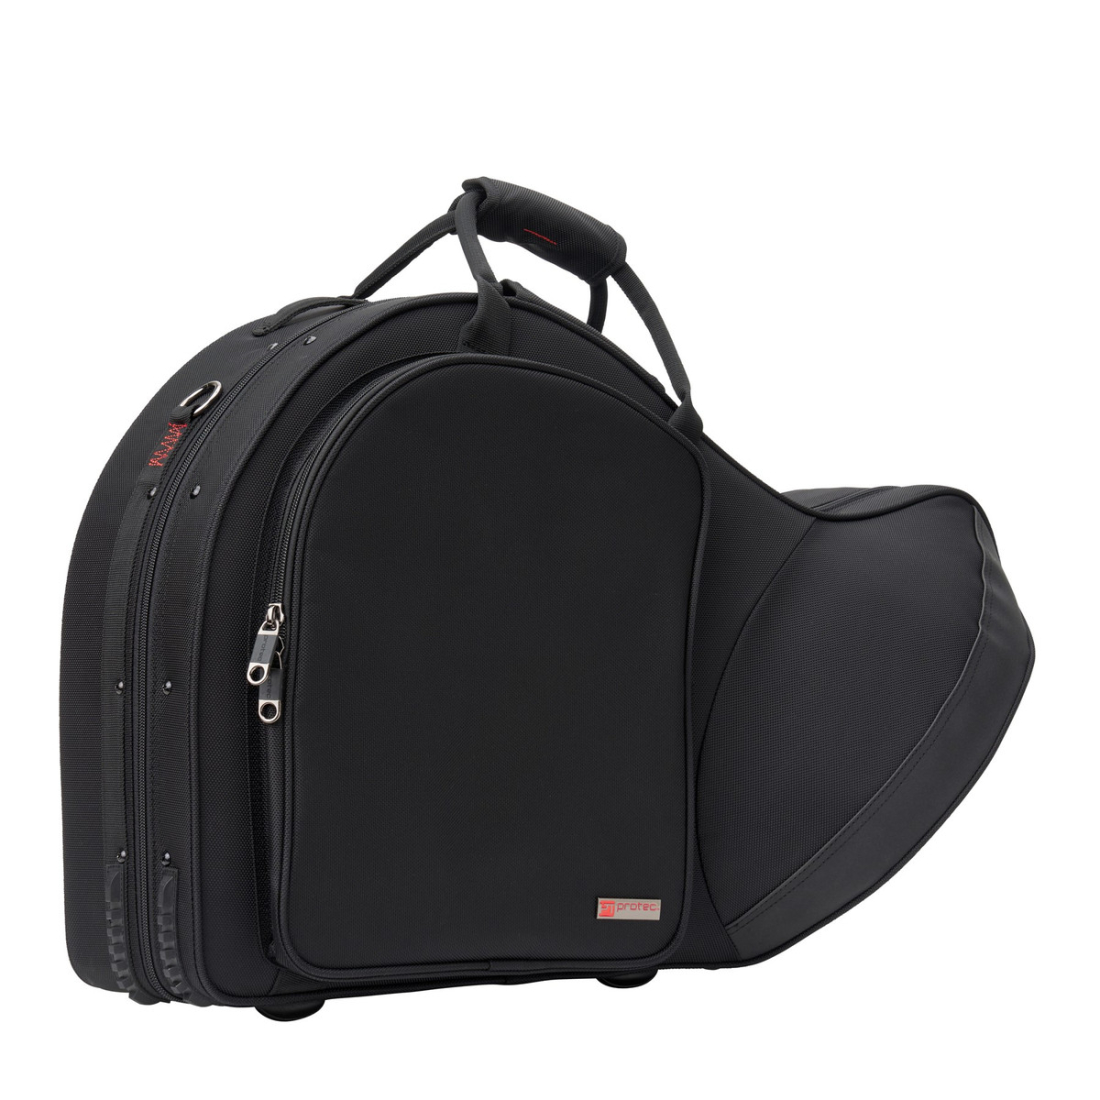 Propac Contoured French Horn Case